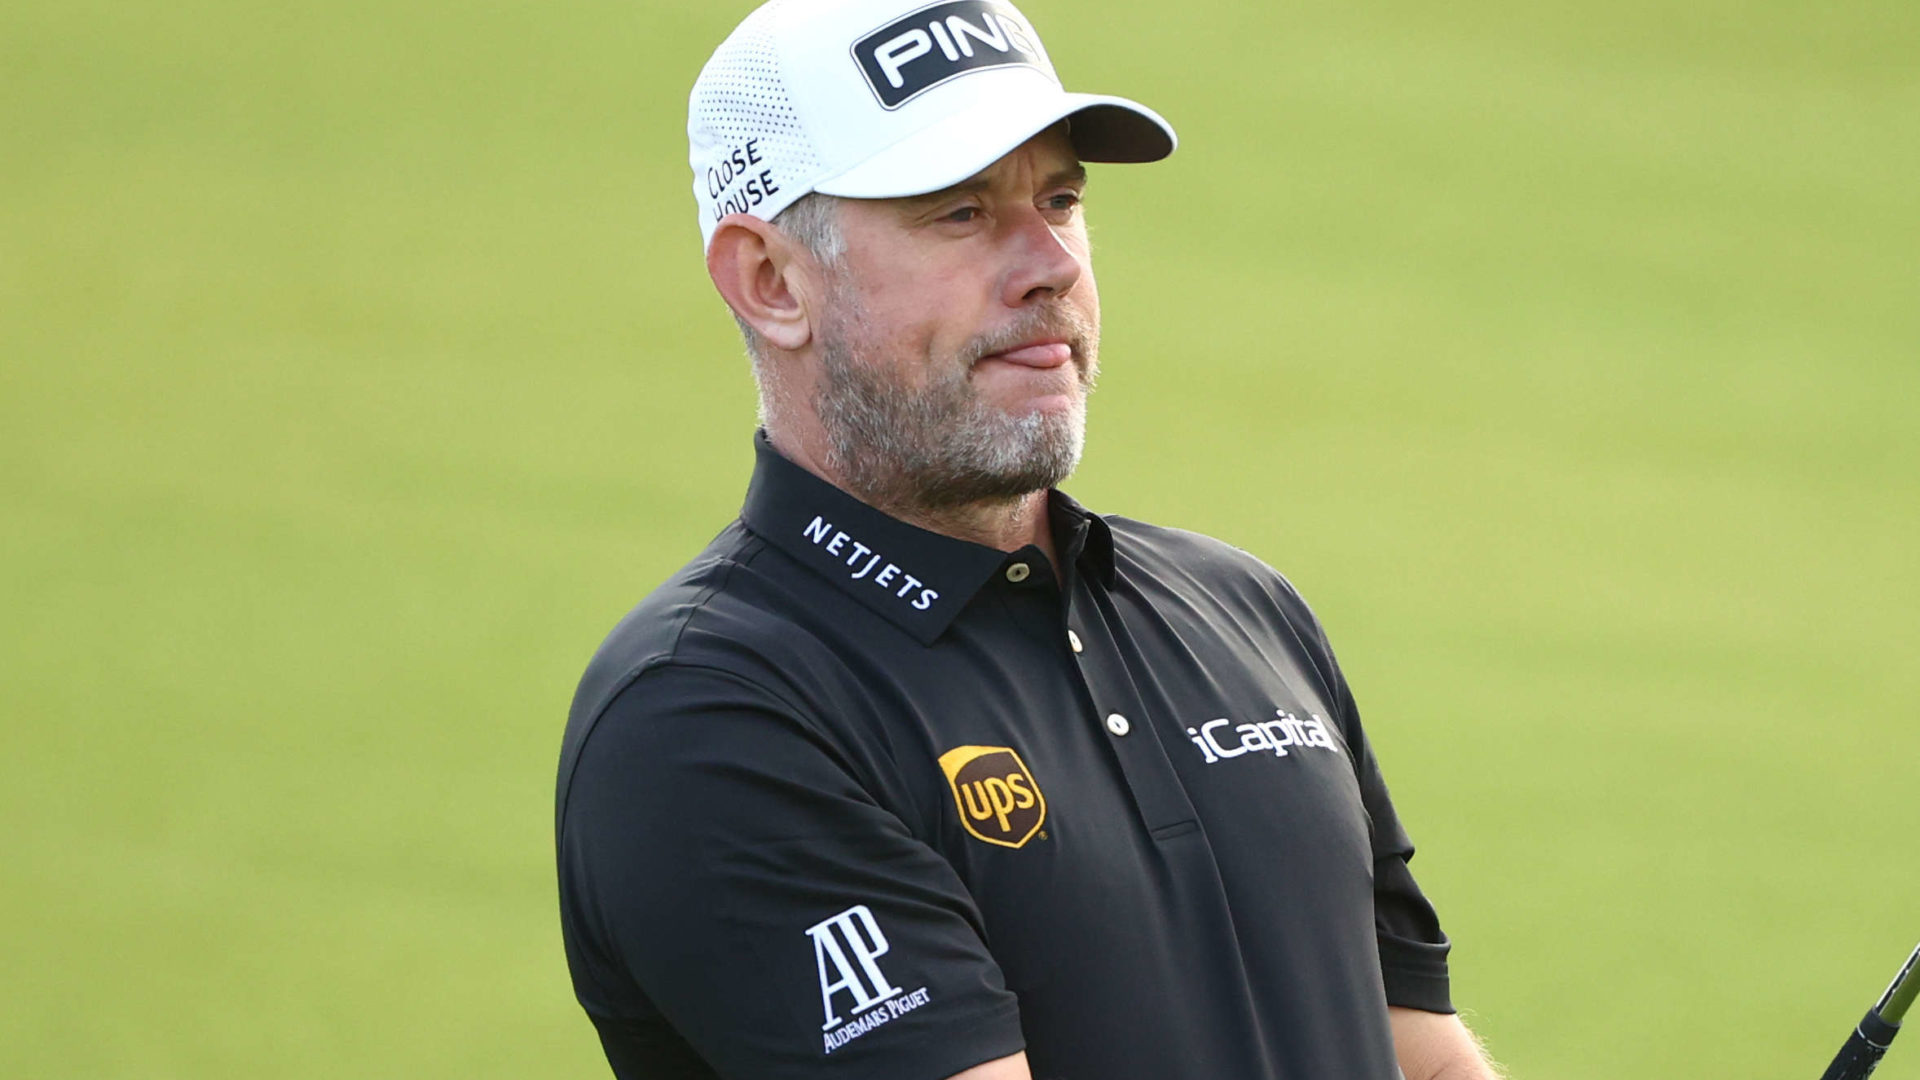 ABU DHABI, UNITED ARAB EMIRATES - JANUARY 19: Lee Westwood of England lines up an approach shot during a practice round prior to the Abu Dhabi HSBC Championship at Yas Links Golf Course on January 19, 2022 in Abu Dhabi, United Arab Emirates. (Photo by Francois Nel/Getty Images)